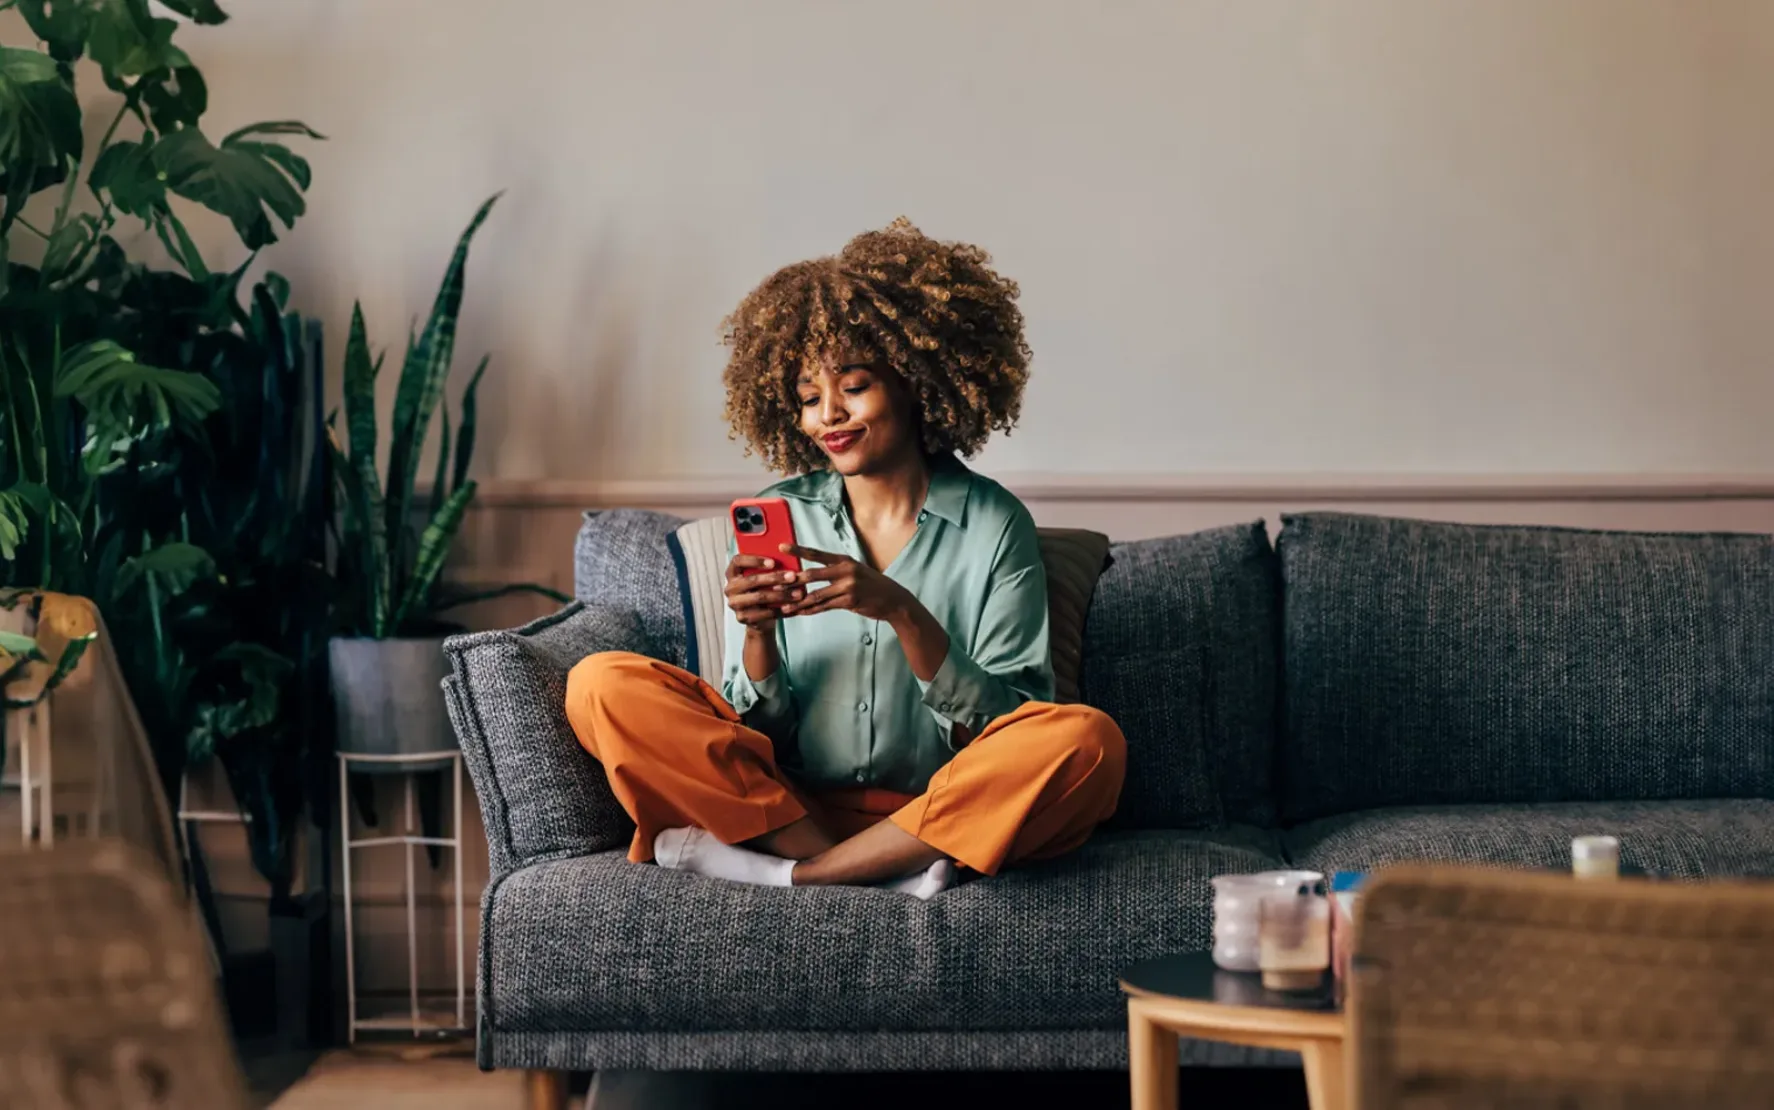 A smiling elegant female using her smartphone while sitting on the cozy sofa in the living room.